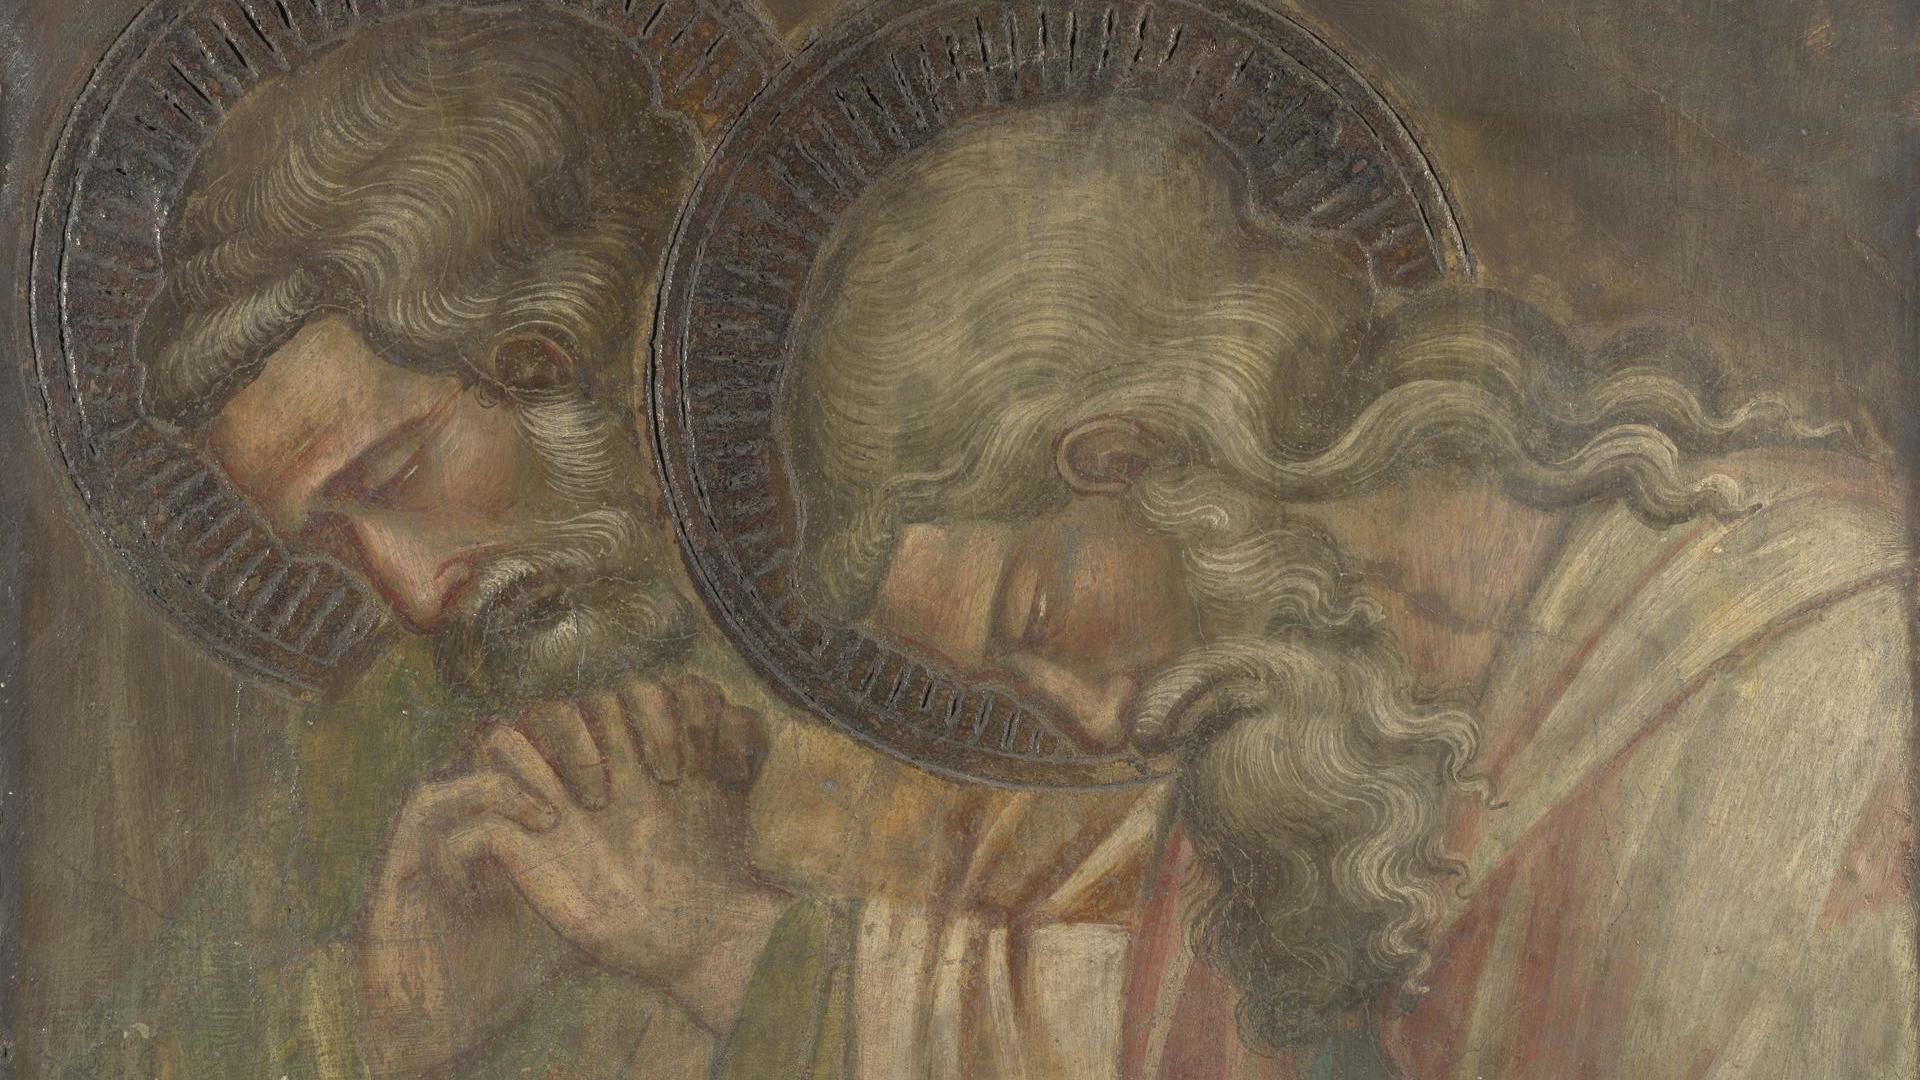 Two Haloed Mourners by Spinello Aretino